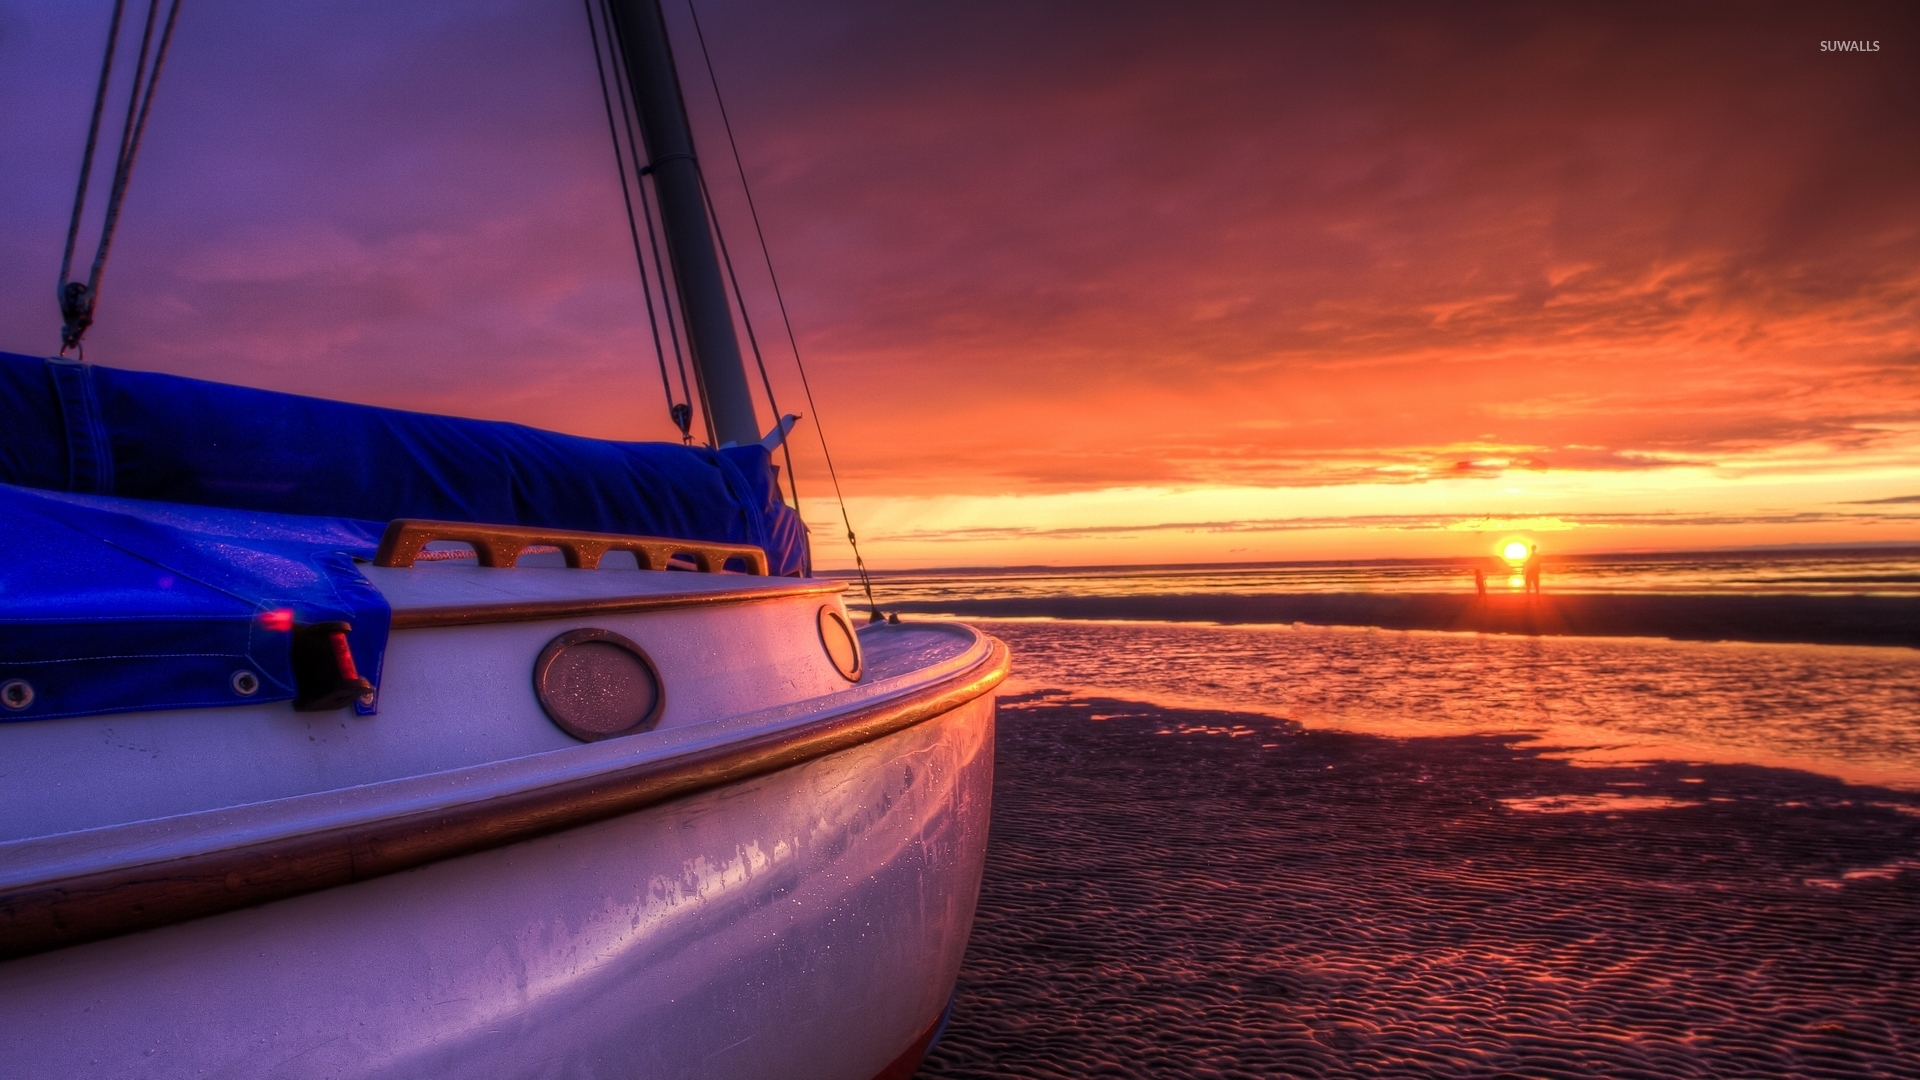 Sailing boat on a sunset beach wallpaper   Photography wallpapers